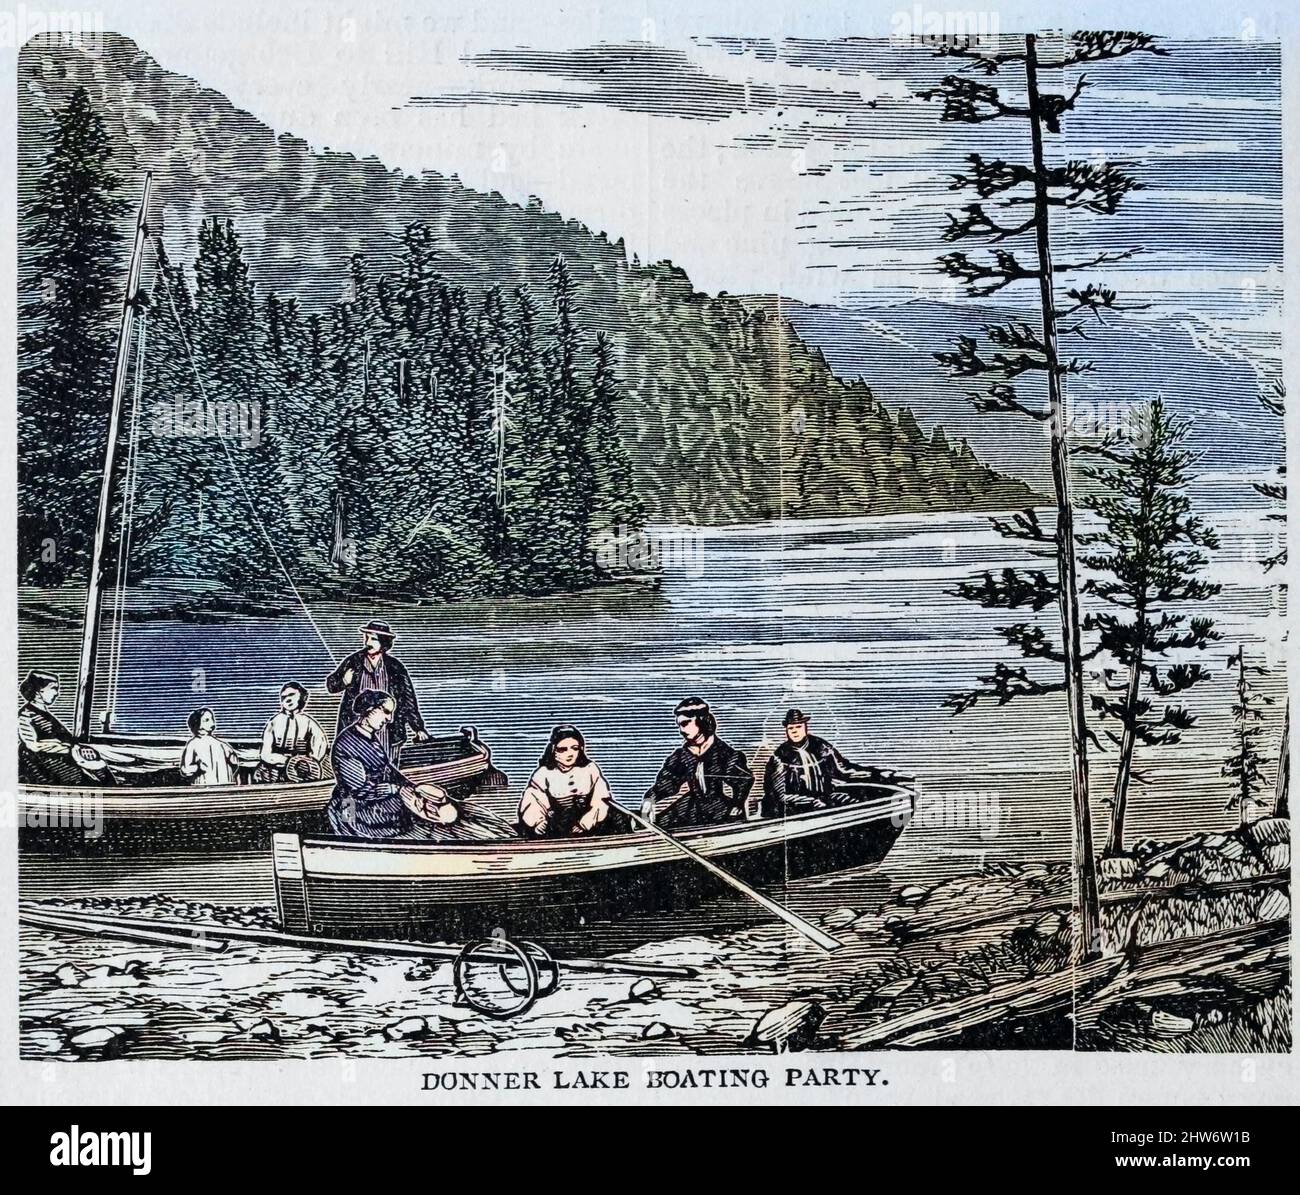 Machine colorised DONNER LAKE BOATING PARTY from the book Crofutt's new overland tourist and Pacific coast guide : through Nebraska, Wyoming, Colorado, Utah, Montana, Idaho, Nevada, California and Arizona by George A Crofutt, Published in Chicago, Ill., by The Overland Pub. Co in 1879 Stock Photo